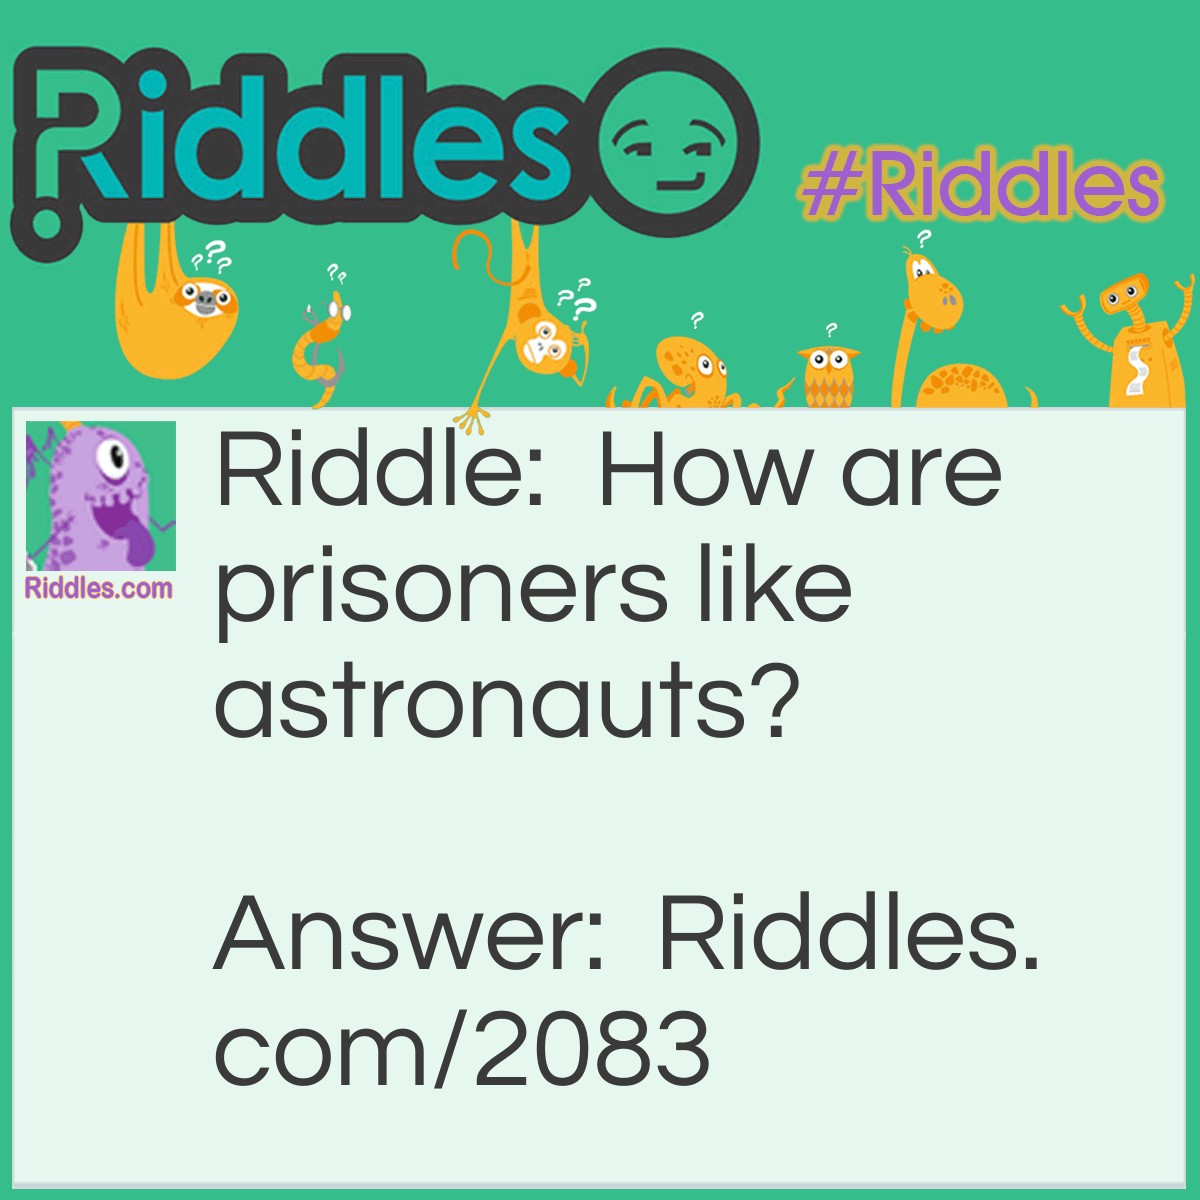 Riddle: How are prisoners like astronauts? Answer: Both are interested in outer space